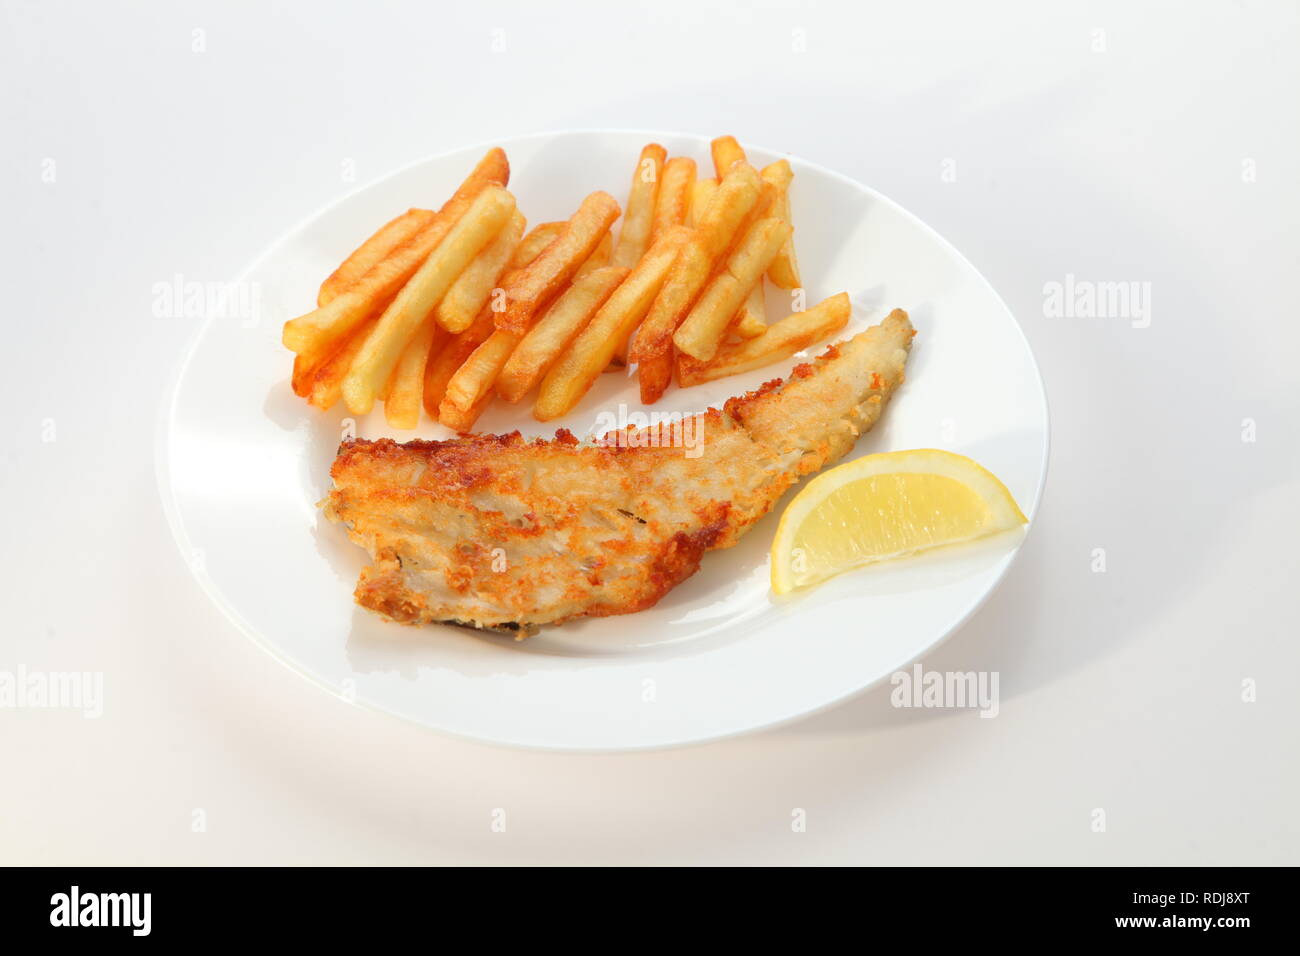 Chips and fish, french fries Stock Photo